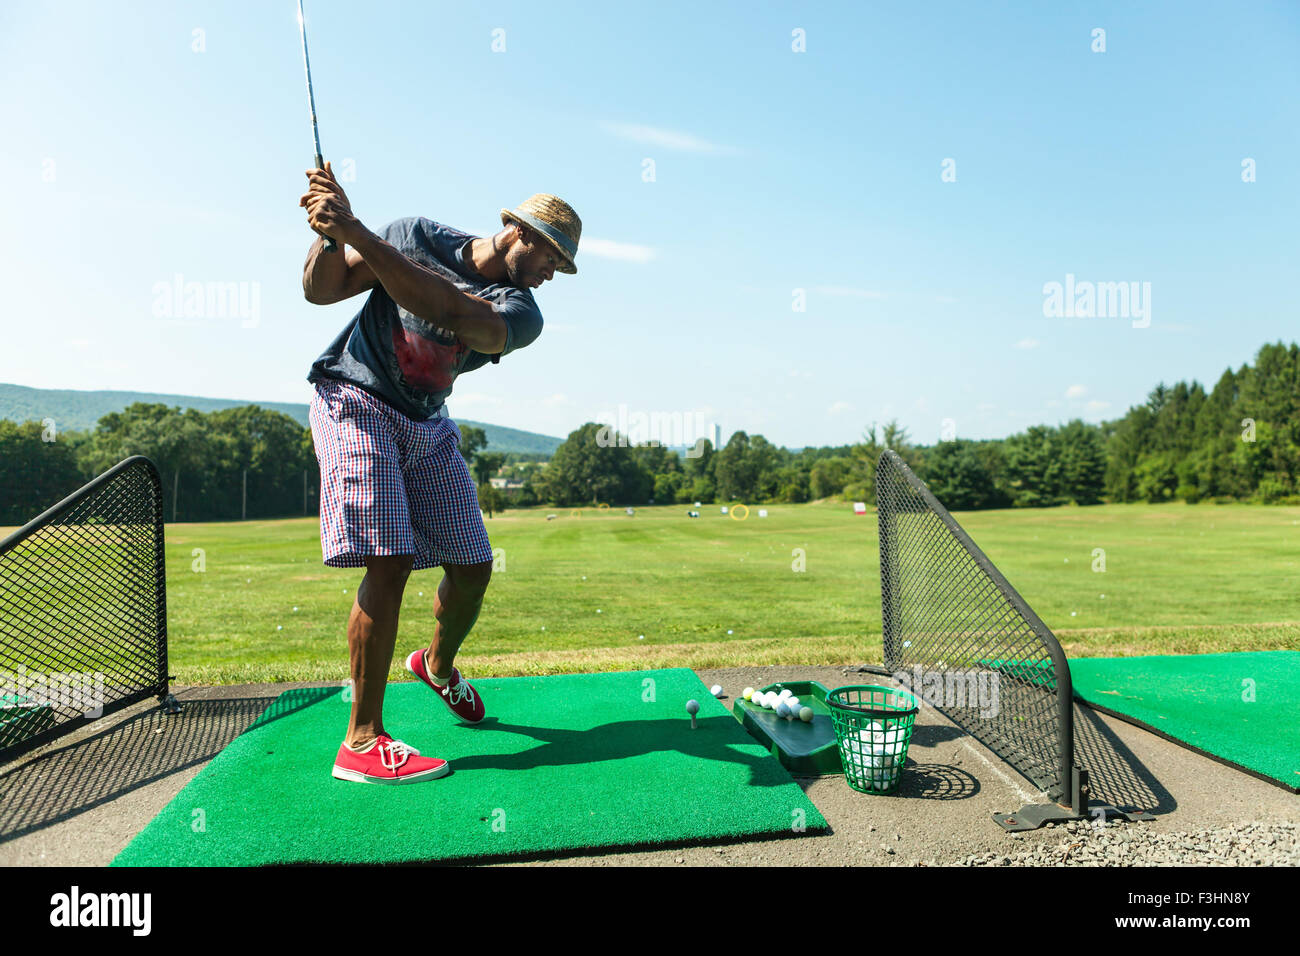 Golf Practice at the Driving Range Stock Photo